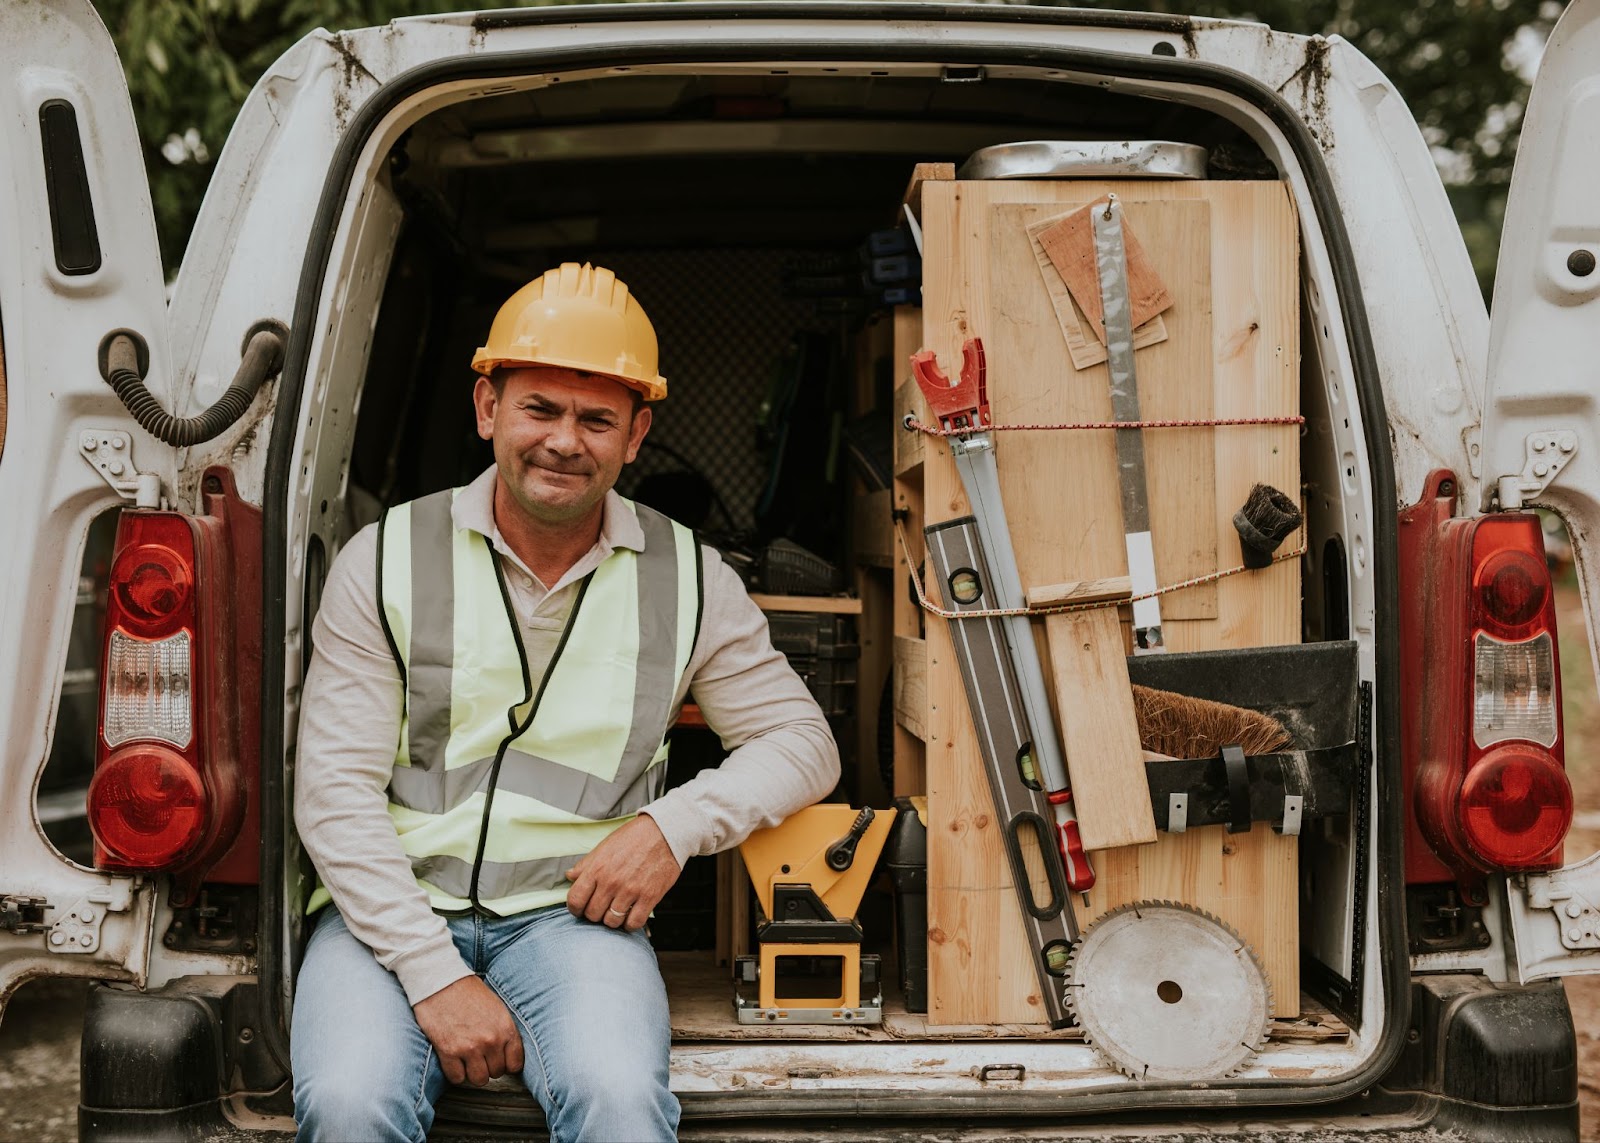 contractor sitting in back of open van filled with tools